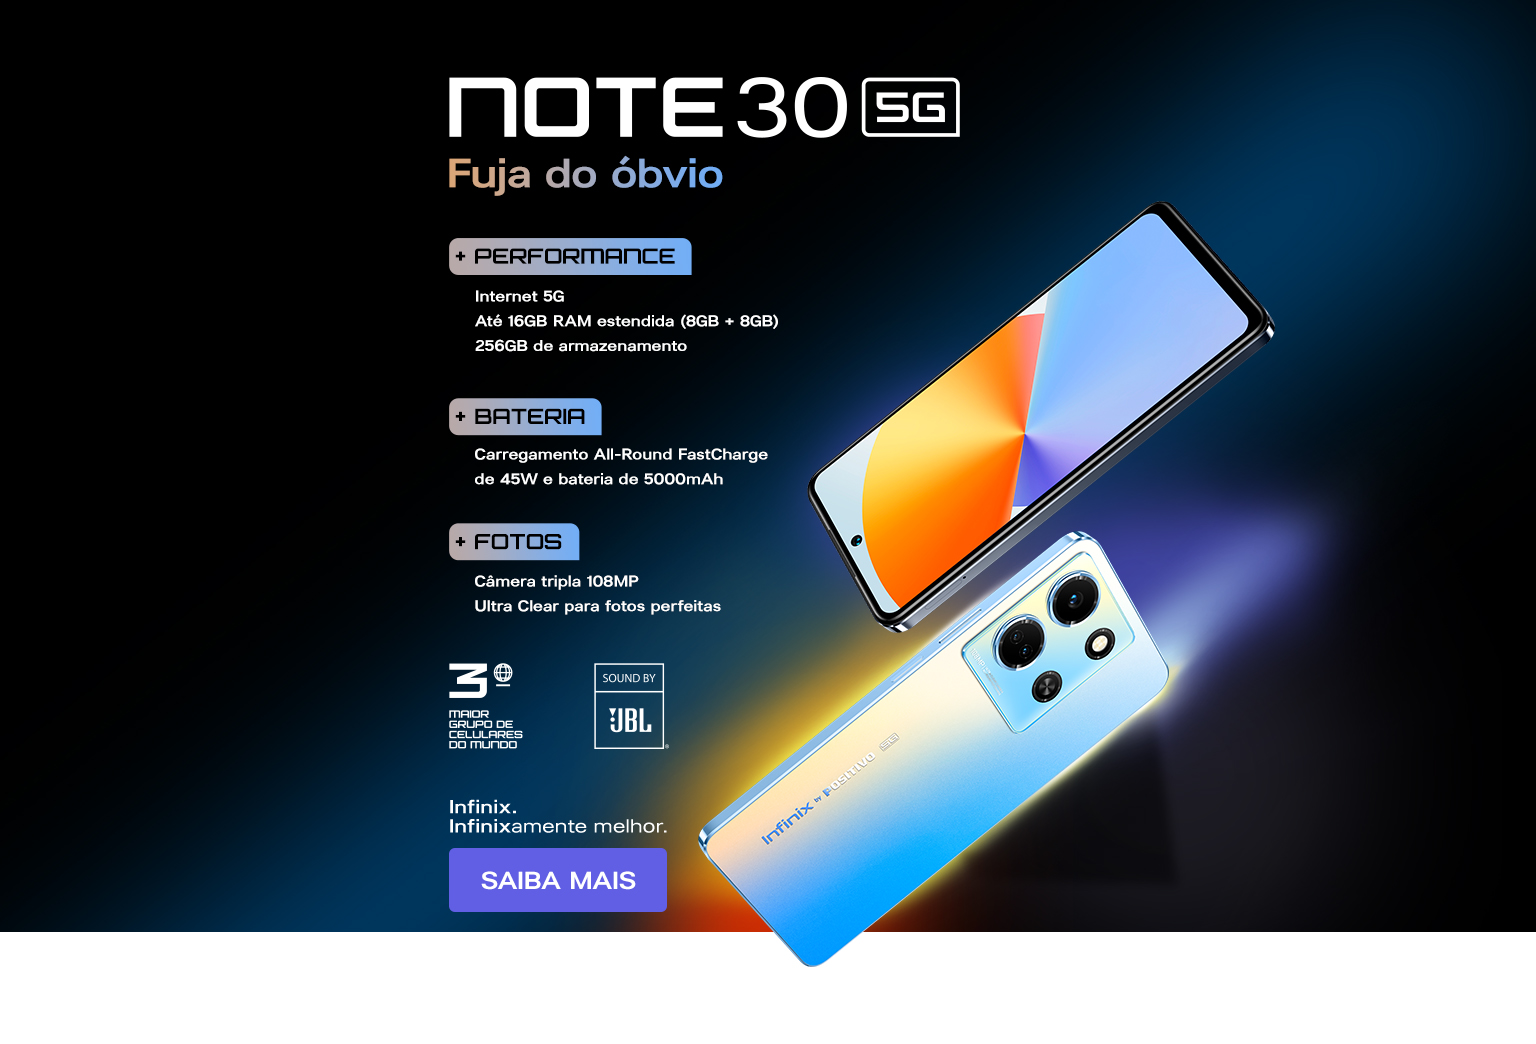 Note 30 5G